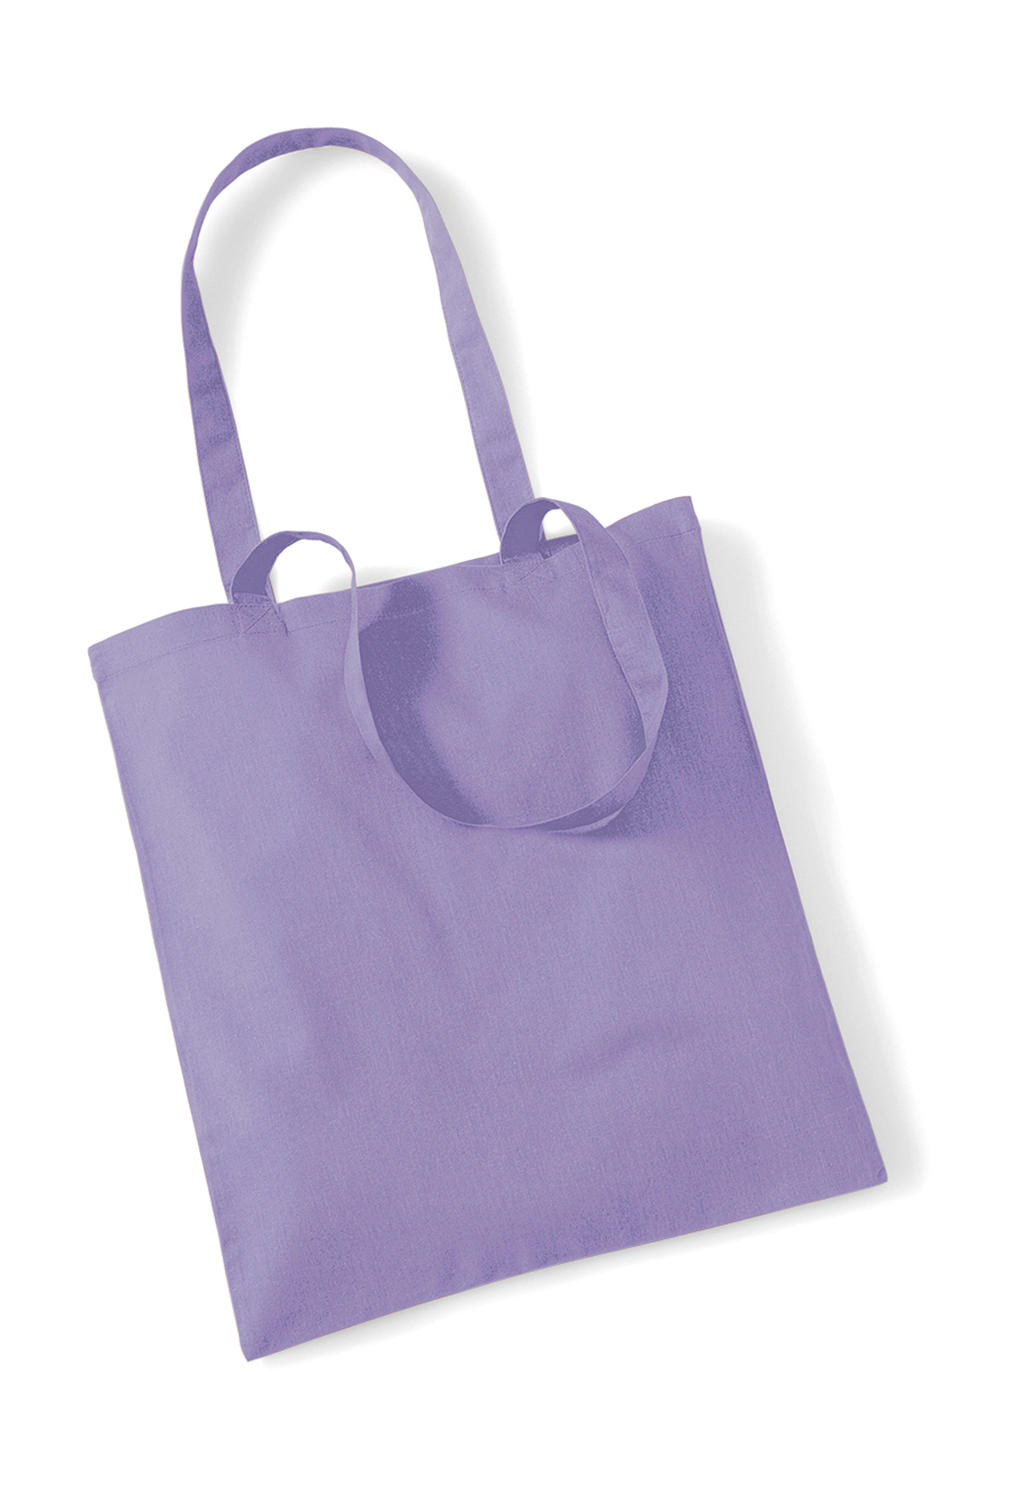  Bag for Life - Long Handles in Farbe Lavender